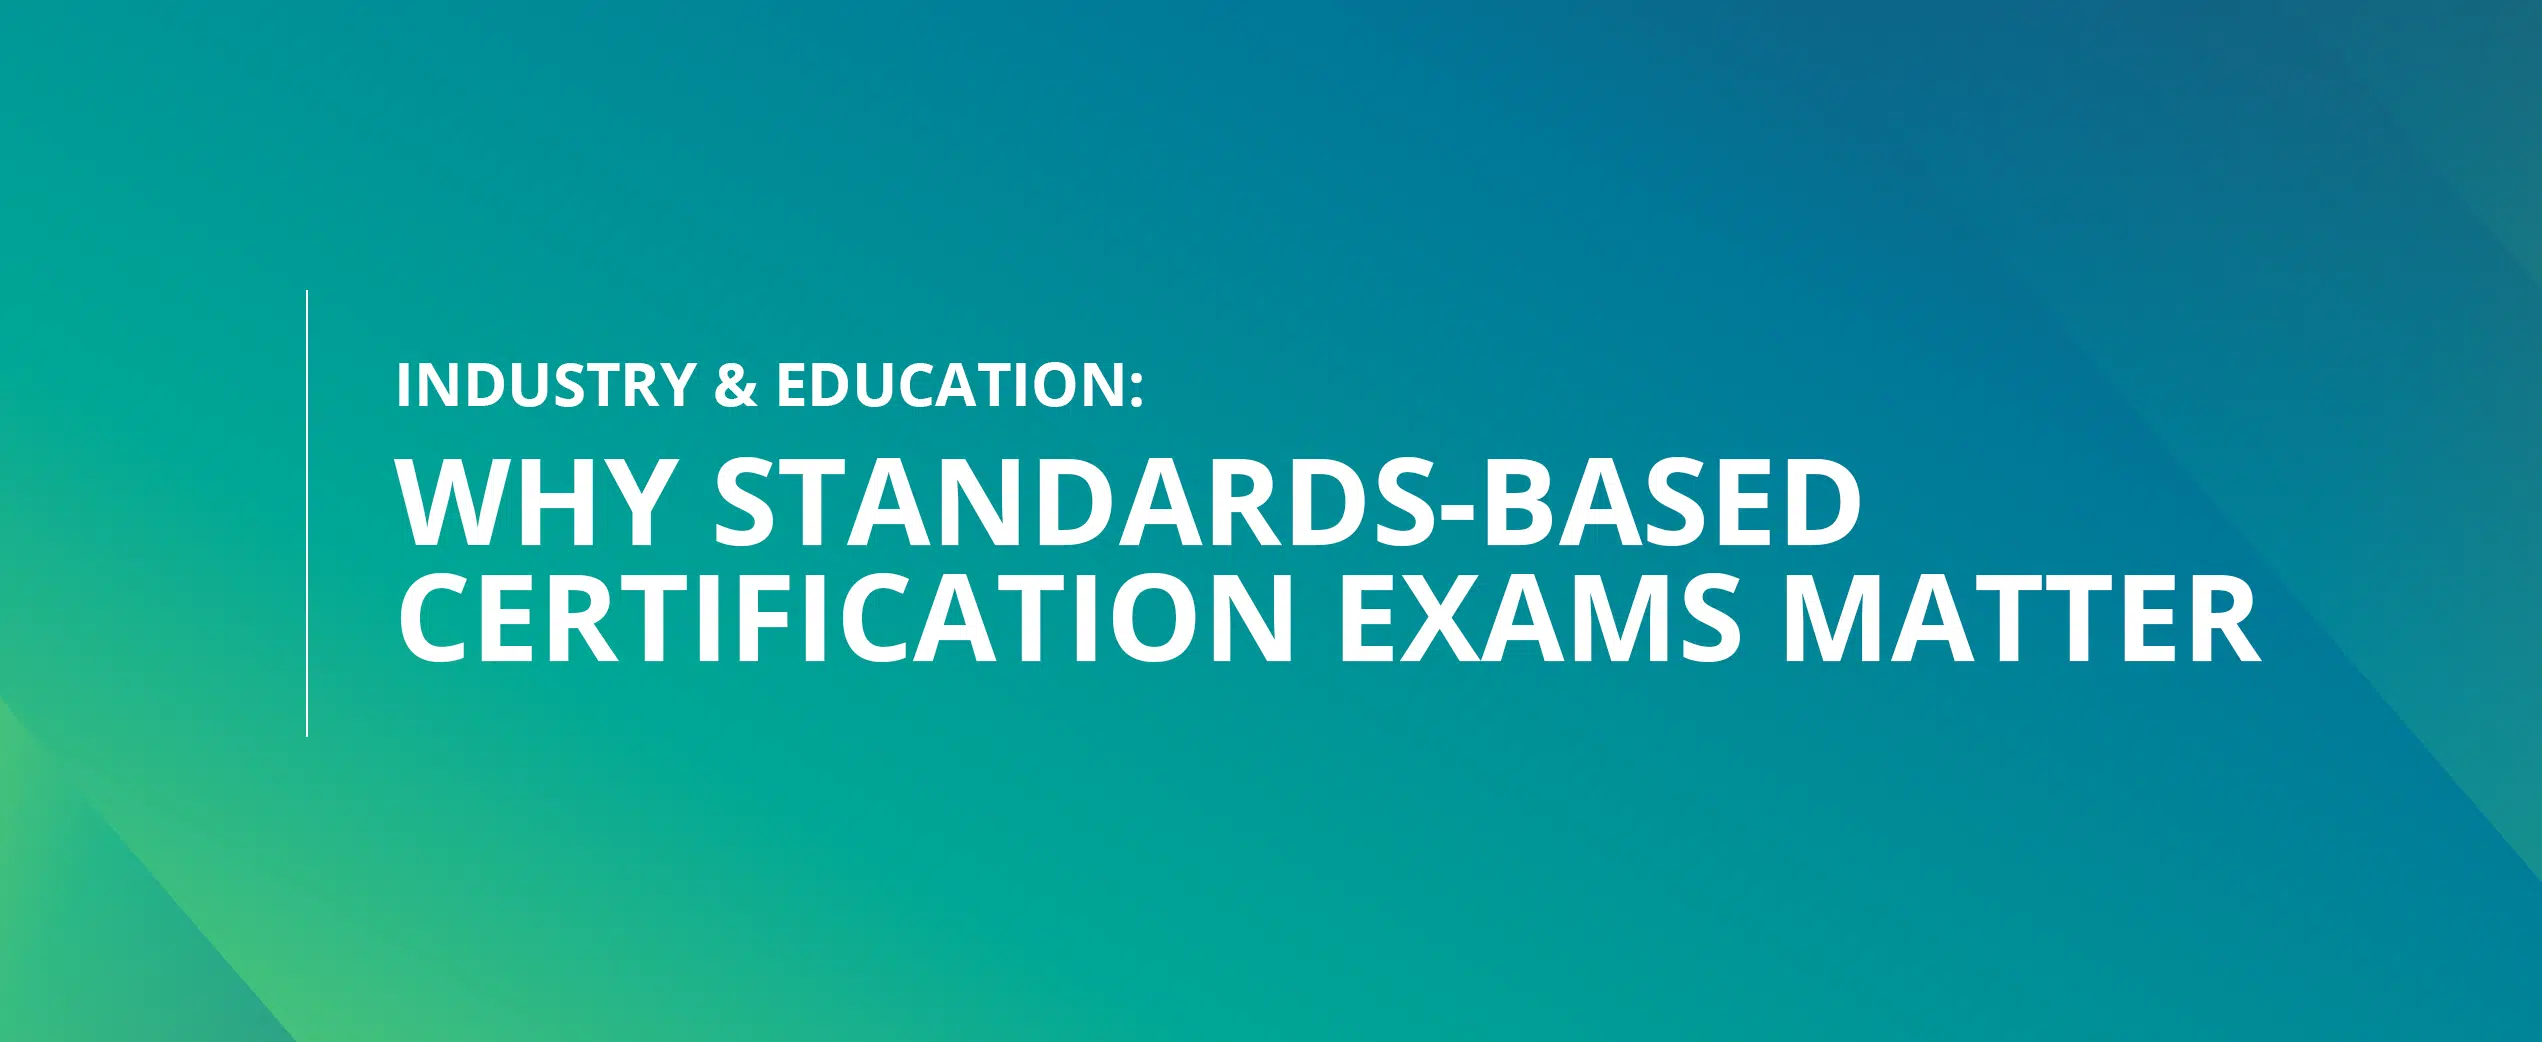 Industry & Education: Why Standards-Based Certification Exams Matter